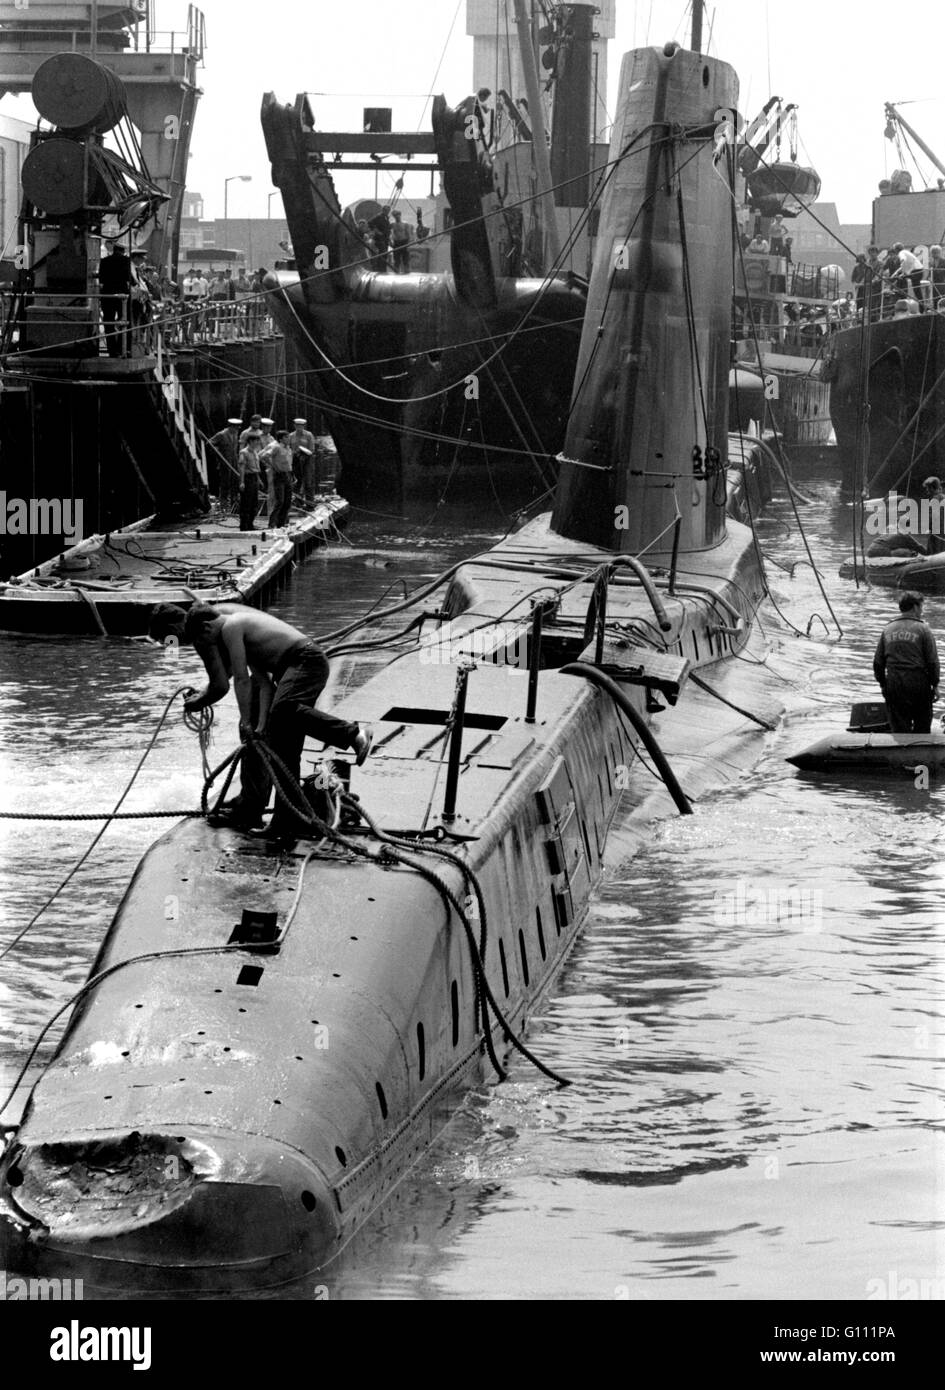 AJAXNETPHOTO.  6TH JULY, 1971.GOSPORT, ENGLAND. SUBMARINE HMS ARTEMIS 1,120 TONS, RISING TO THE SURFACE AT THE ROYAL NAVY SUBMARINE BASE HMS DOLPHIN. THE SUBMARINE SANK TRAPPING THREE CREW INSIDE FOR 10 HOURS ALONGSIDE THE QUAY AT HMS DOLPHIN ON JULY 2ND, 1971.  PHOTO:JONATHAN EASTLAND/AJAX. REF:ARTEMIS 710707 1001 Stock Photo